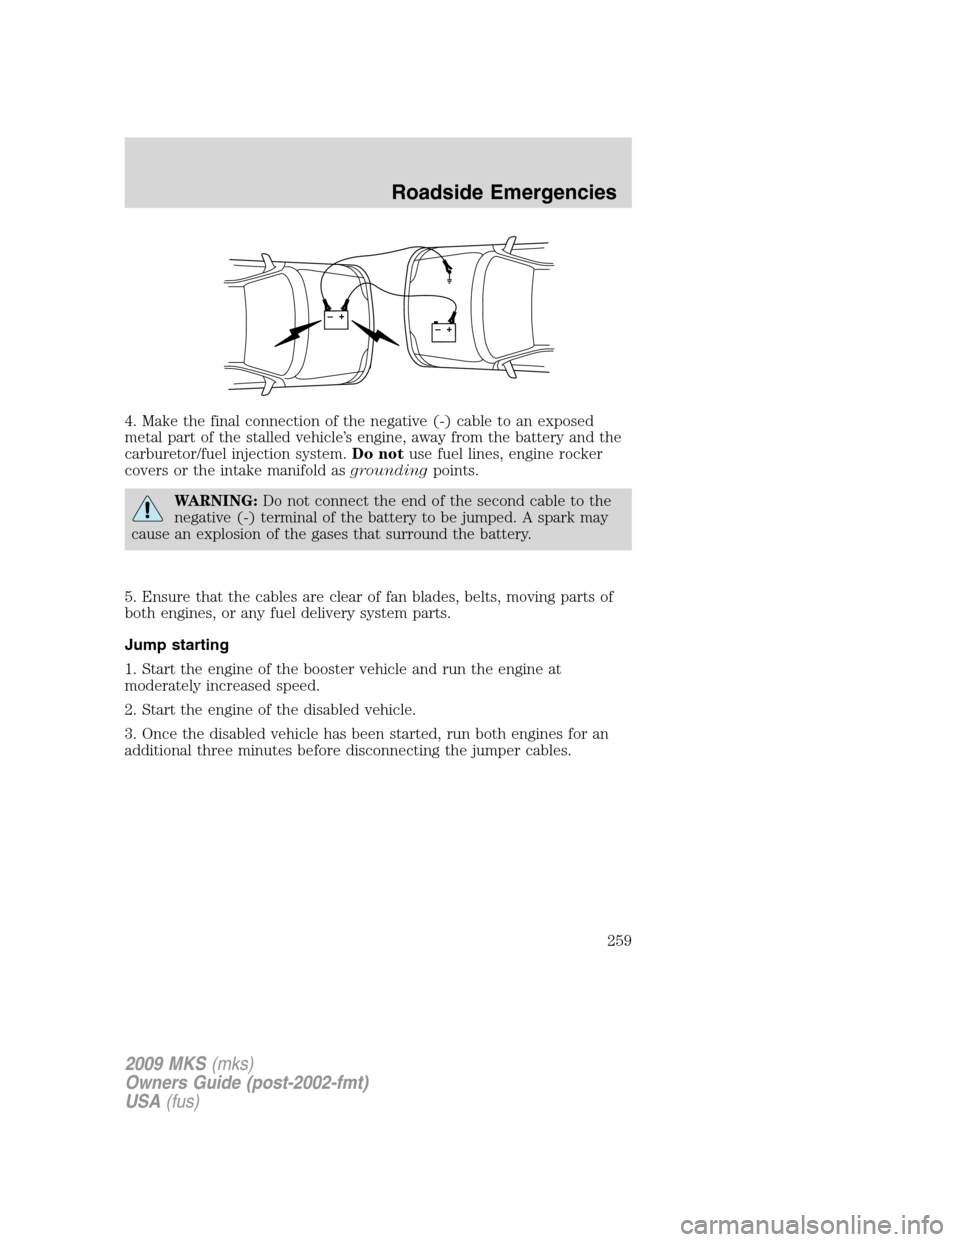 LINCOLN MKS 2009  Owners Manual 4. Make the final connection of the negative (-) cable to an exposed
metal part of the stalled vehicle’s engine, away from the battery and the
carburetor/fuel injection system.Do notuse fuel lines, 